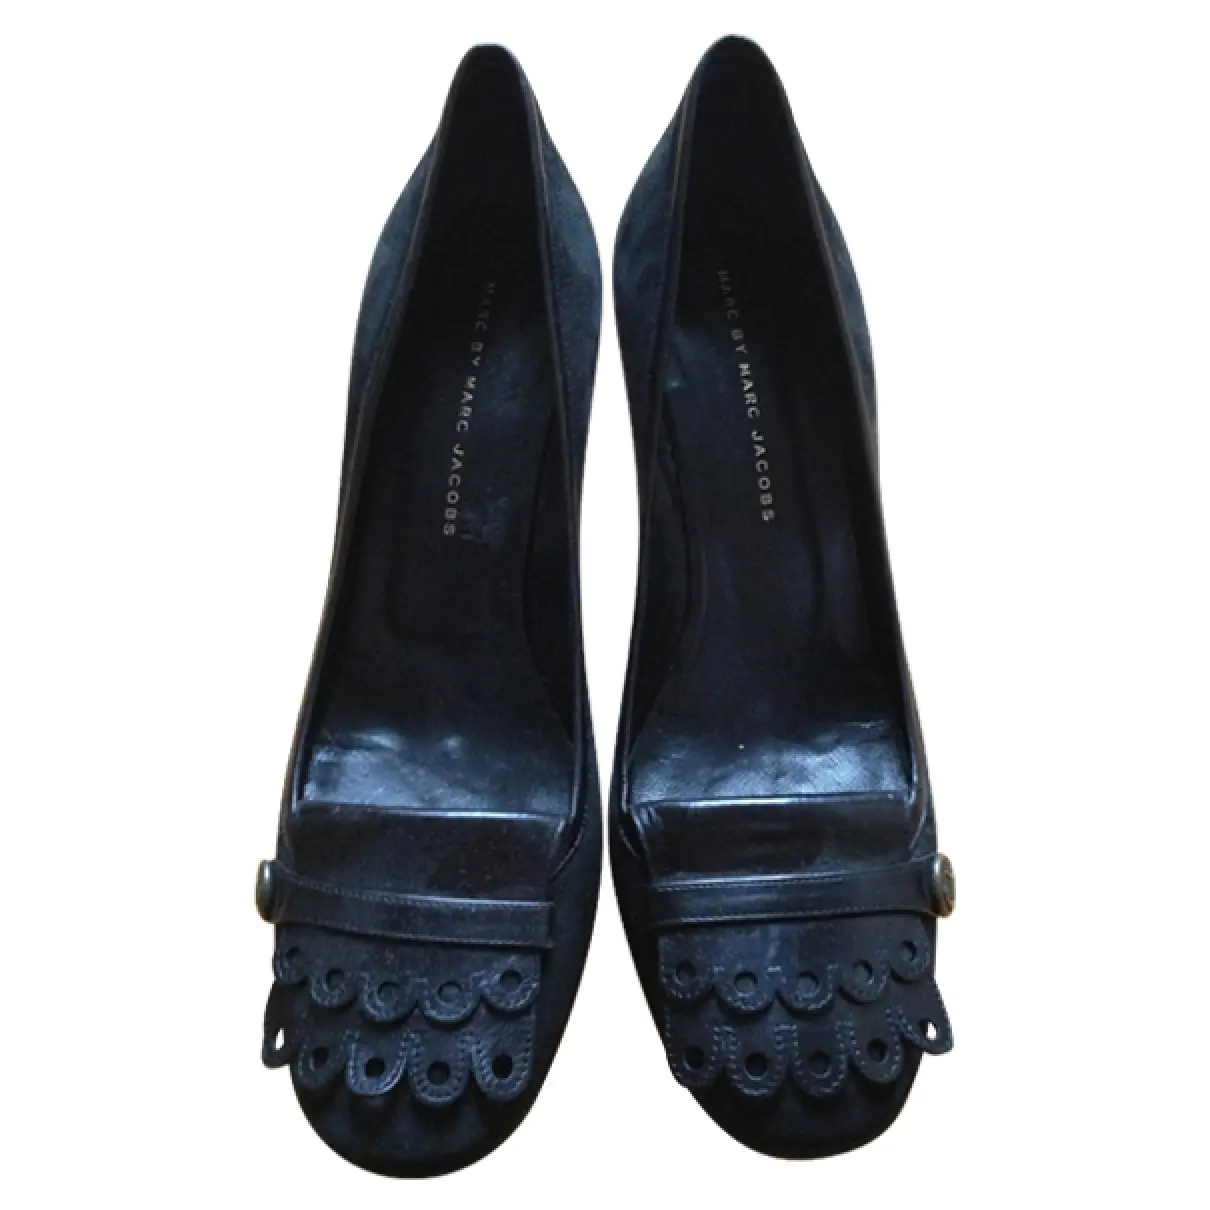 Black Leather Flats Marc by Marc Jacobs